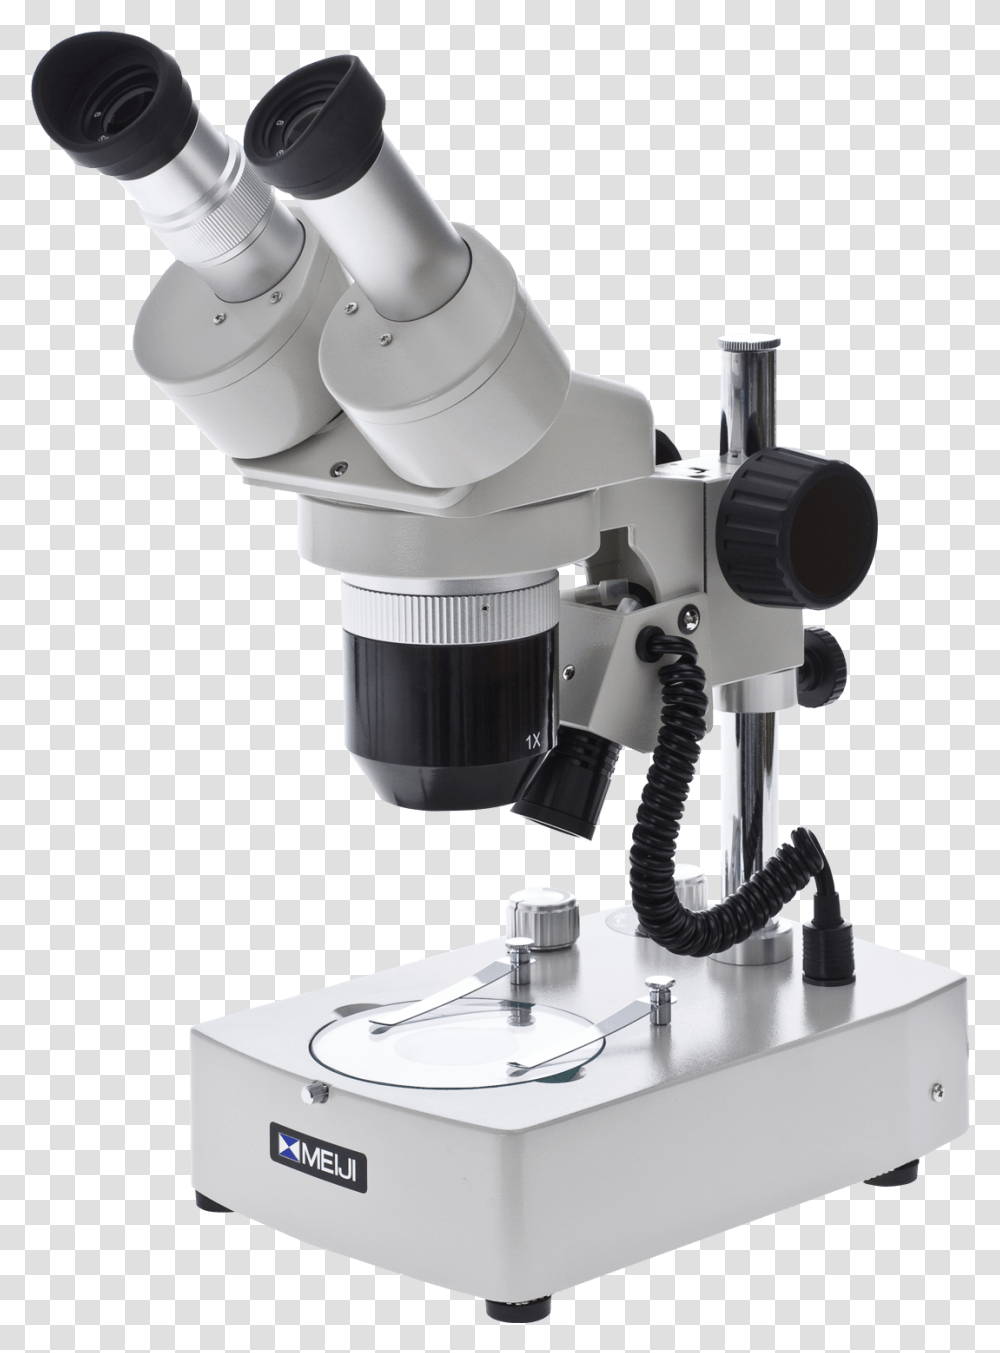 Meiji Microscope Stereo Microscope, Sink Faucet Transparent Png